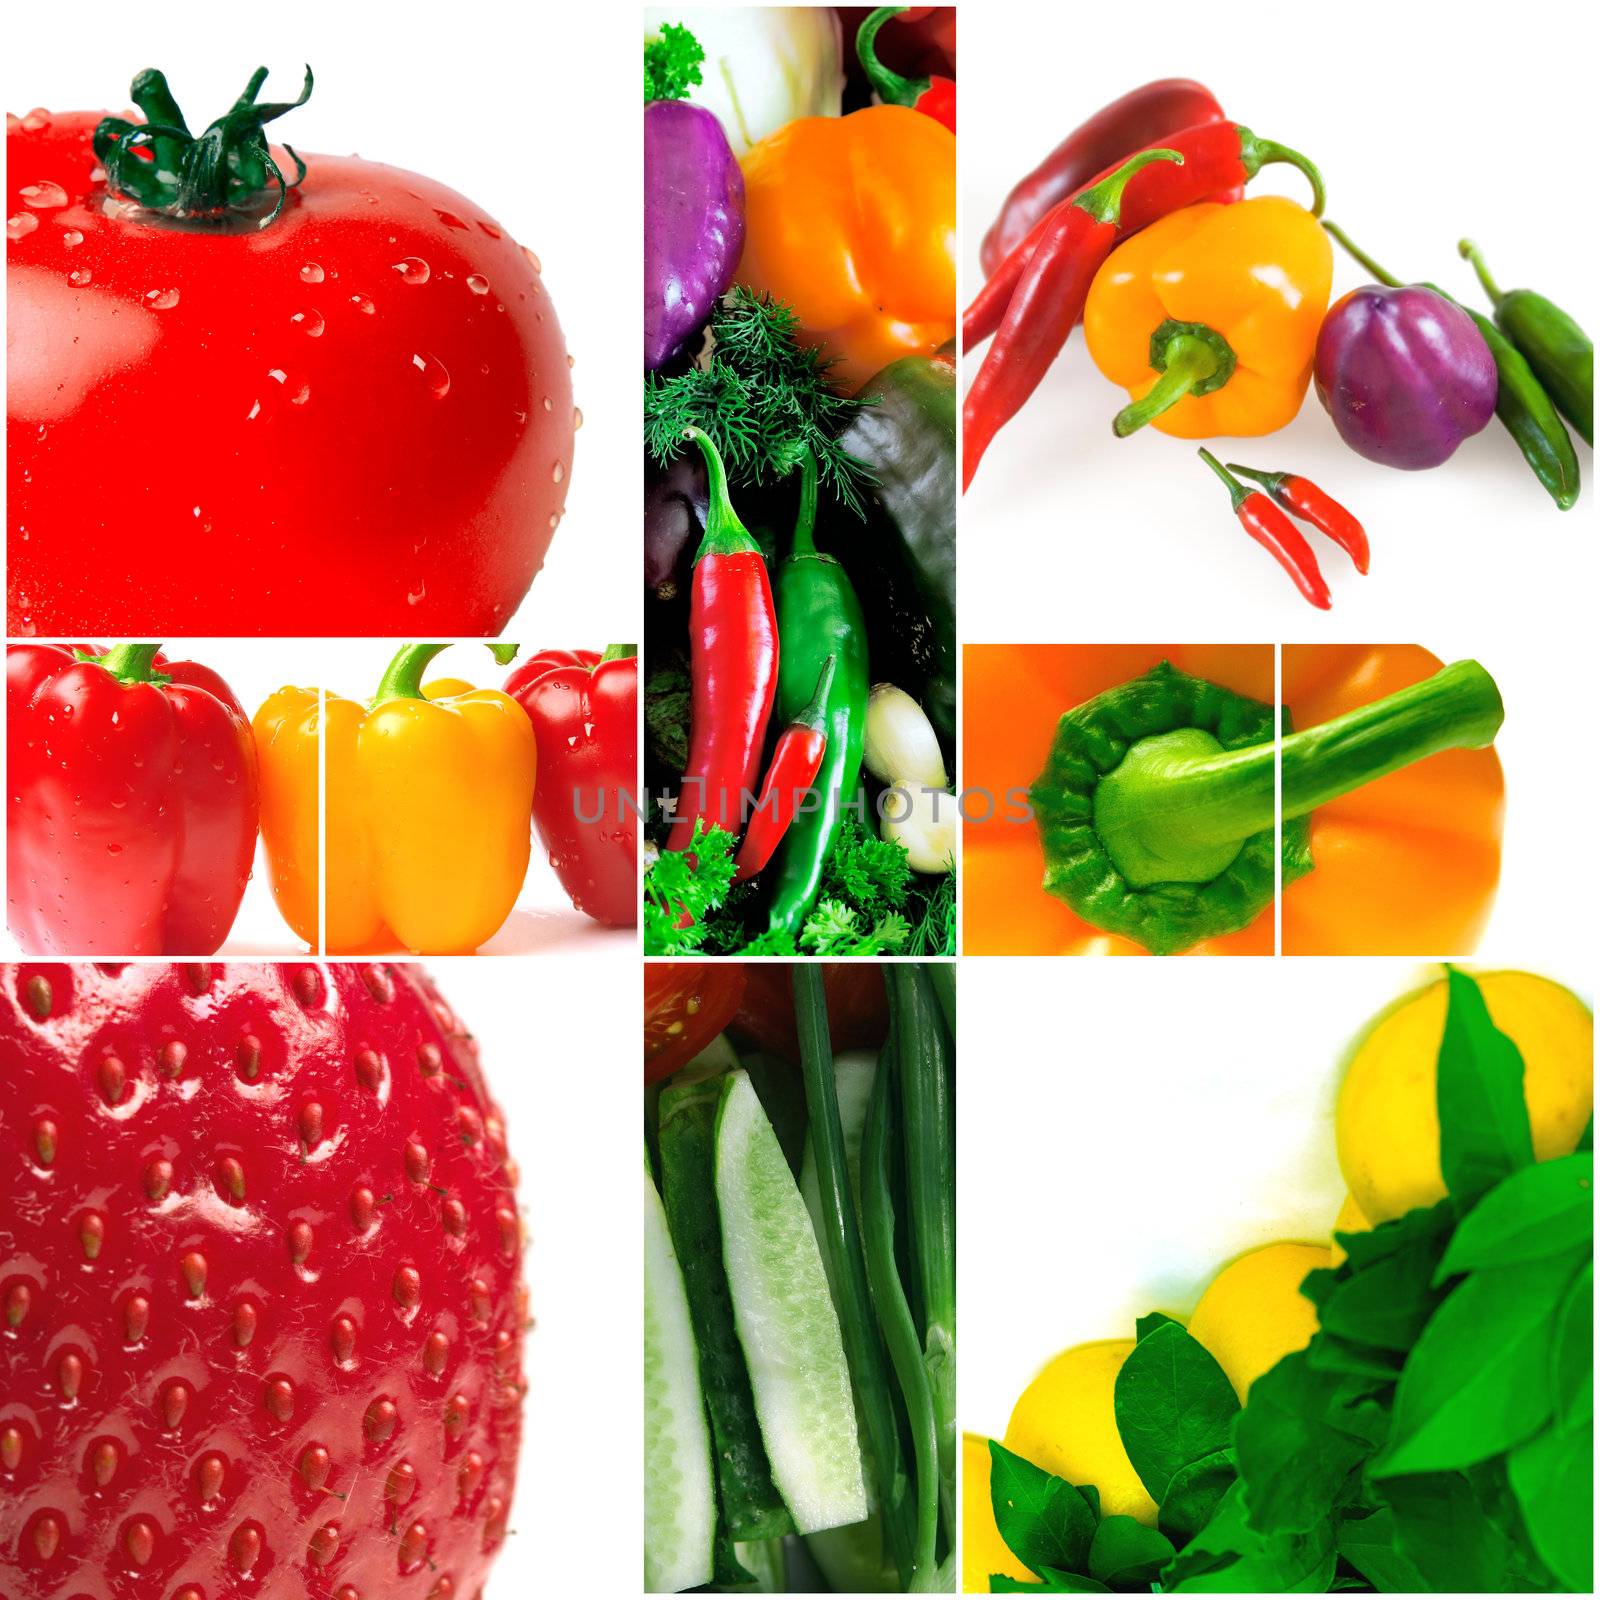 bright and colorful fruit and vegetables on white background by Serp